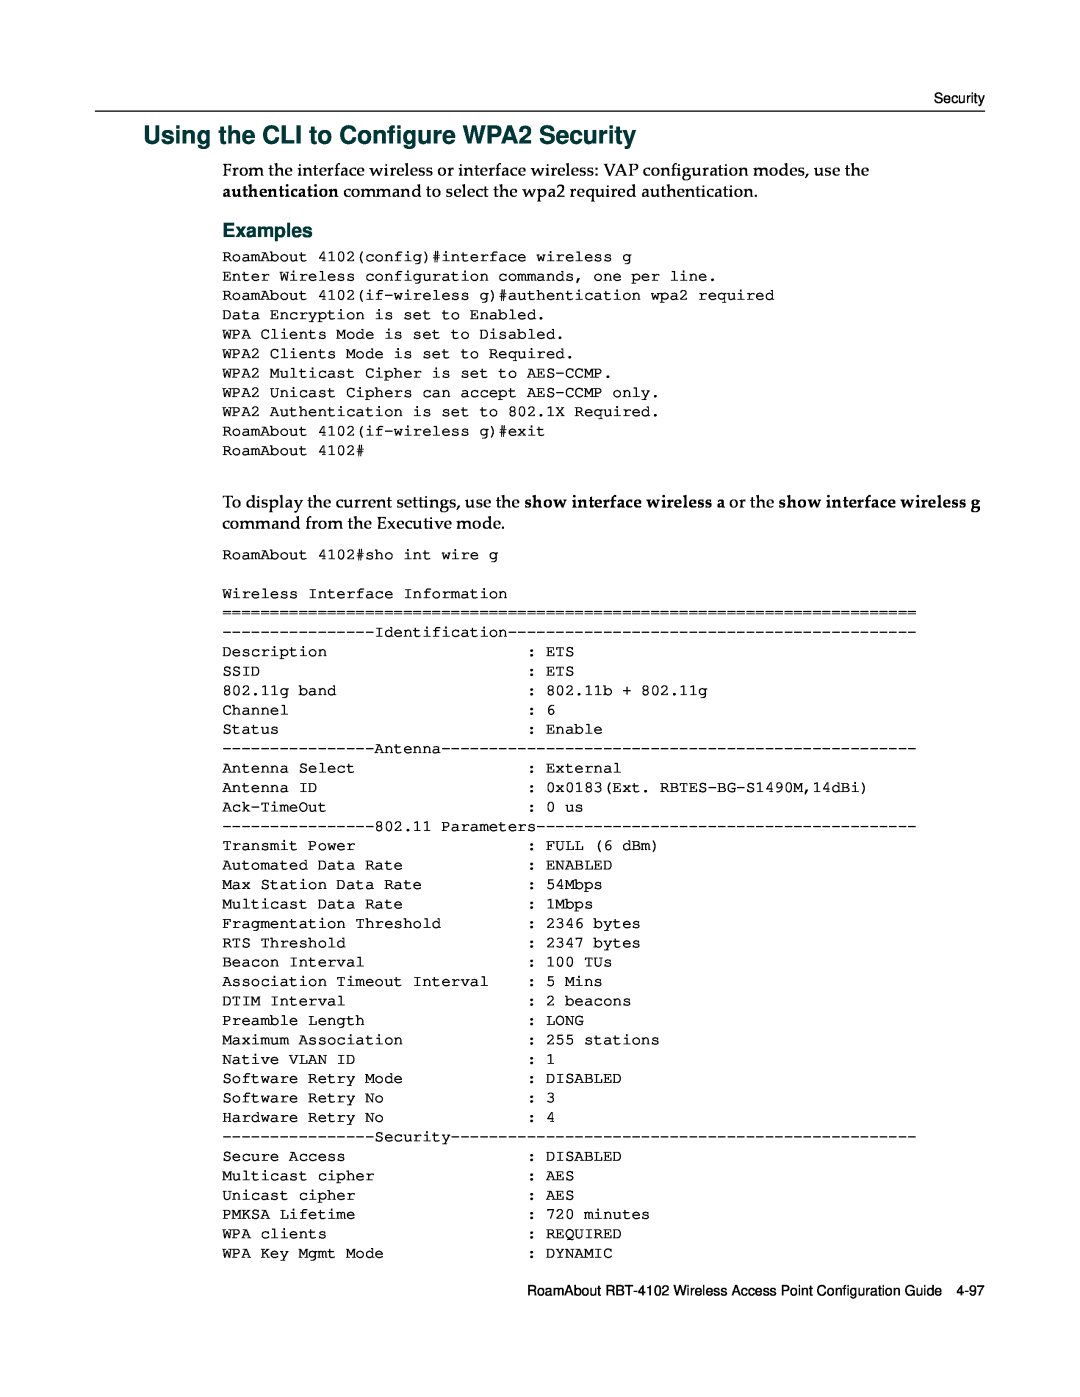 Enterasys Networks RBT-4102 manual Using the CLI to Configure WPA2 Security, Examples 